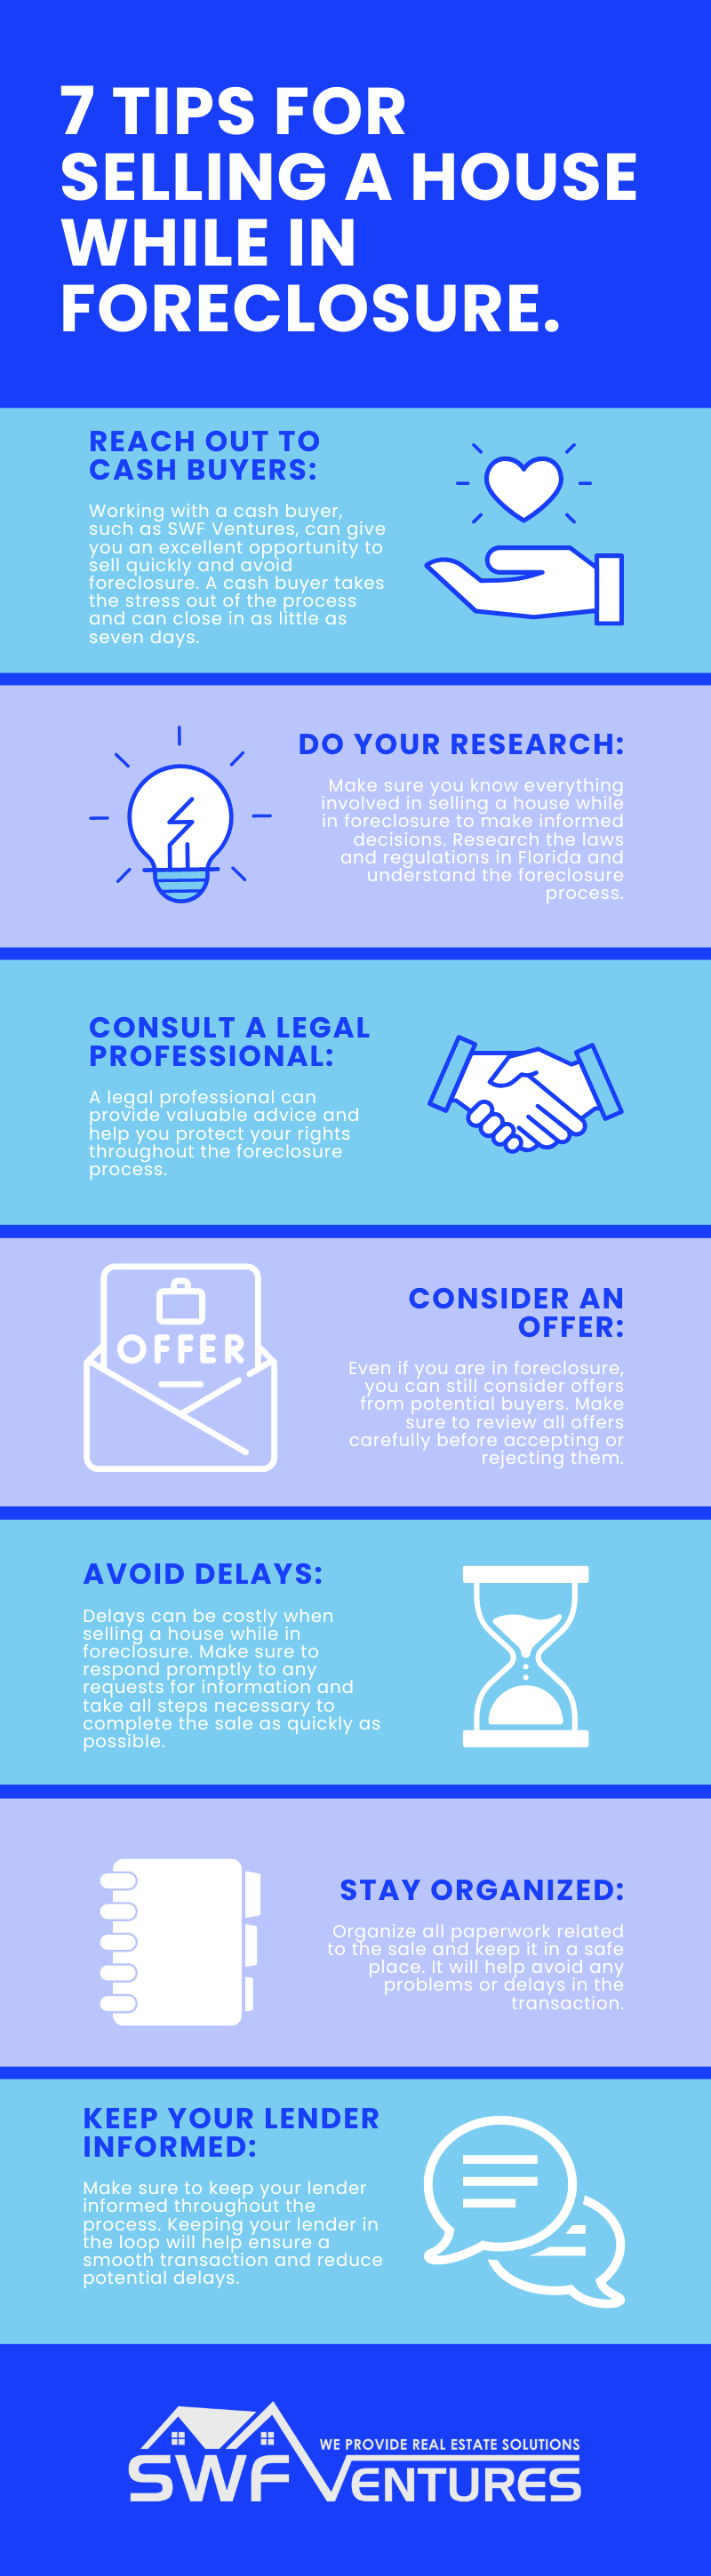 7 Tips For Selling A House While In Foreclosure In Florida Infographic